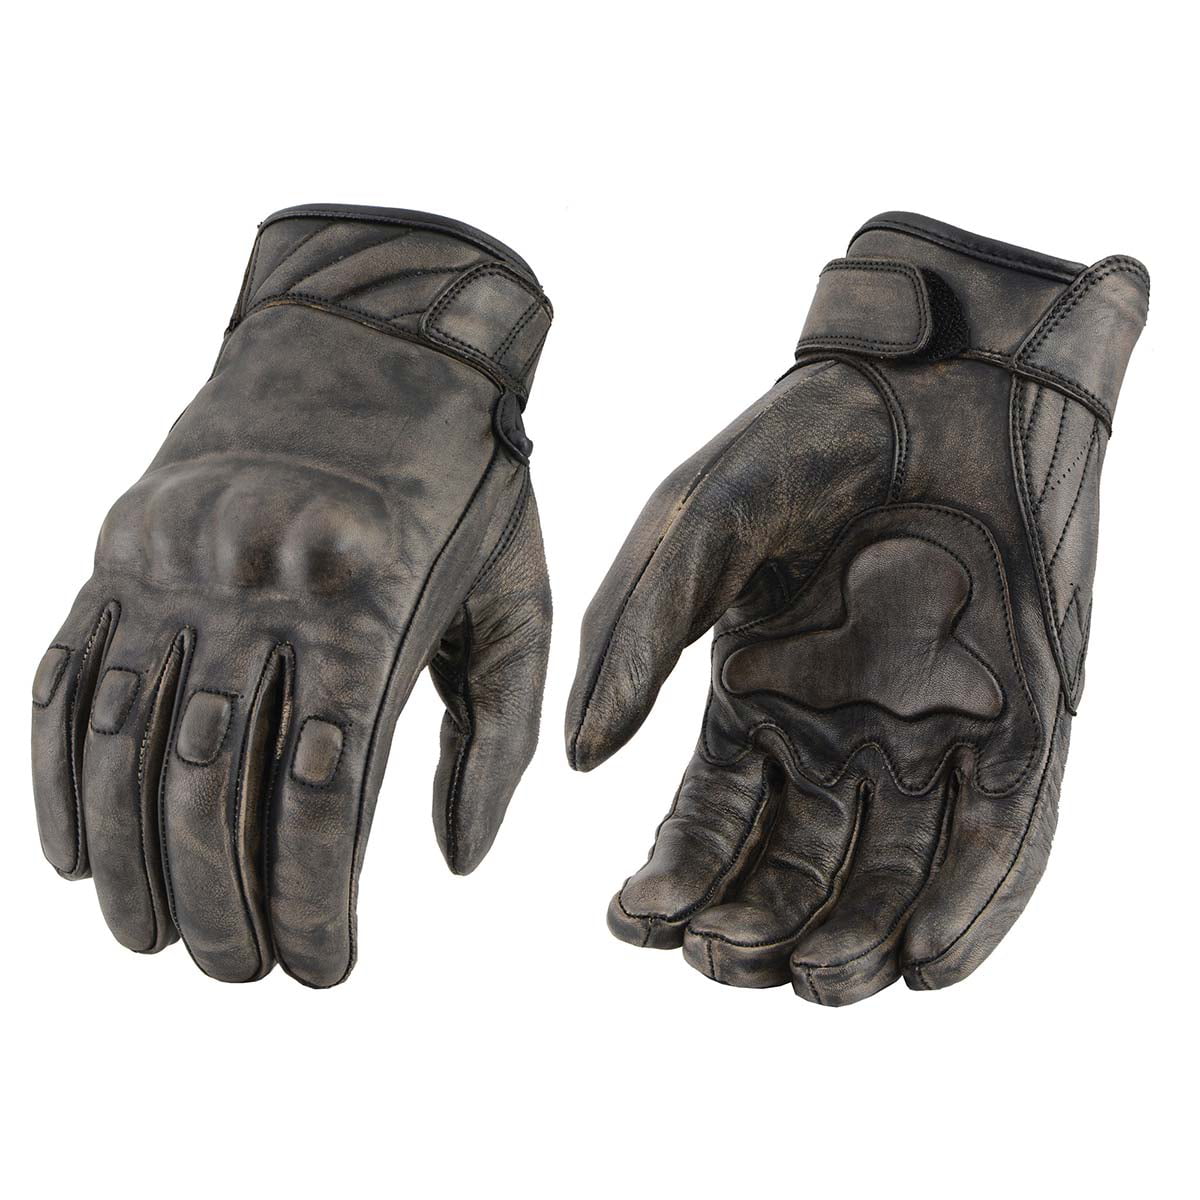 MENS MOTORCYCLE CRUISER DISTRESSED GREY SOFT LEATHER LINED GEL PALM GLOVES SOFT 